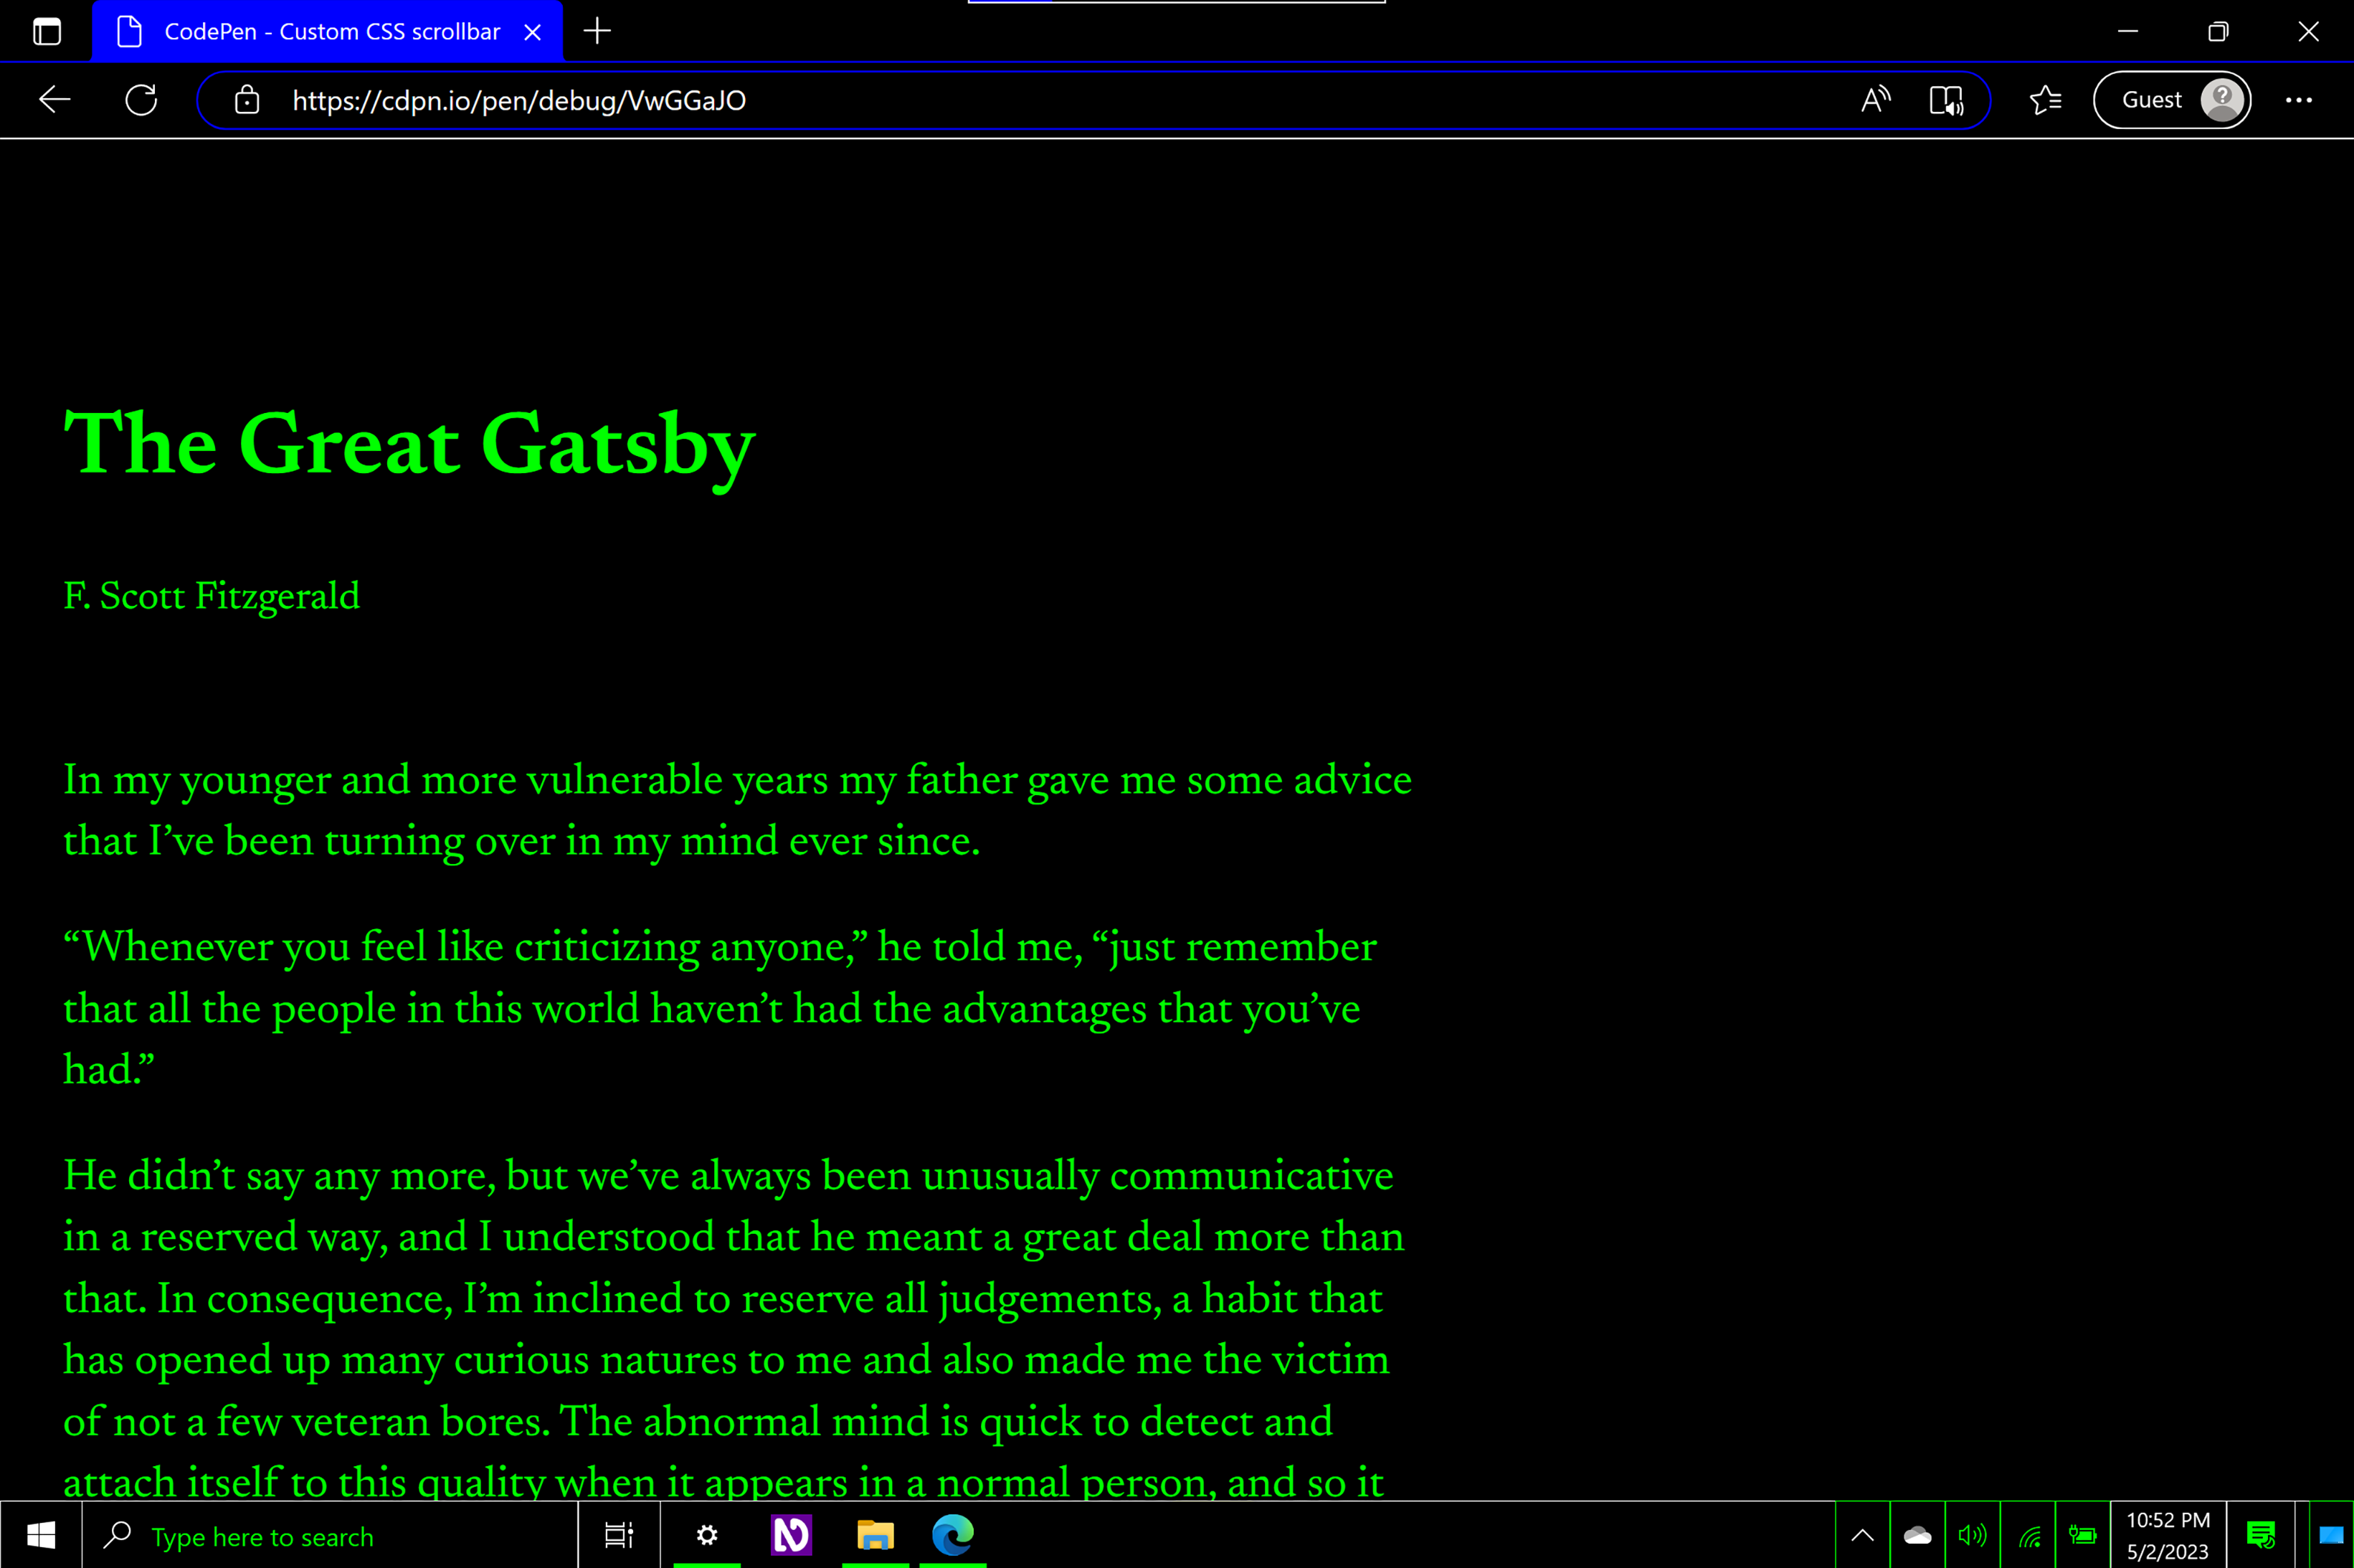 Microsoft Edge with a tab open to a CodePen set the display opening text to The Great Gatsby. The background of the webpage and the browser chrome is black and the type is bright green. A blue highlight color is used for borders and accents. The scrollbar is missing. Screenshot.